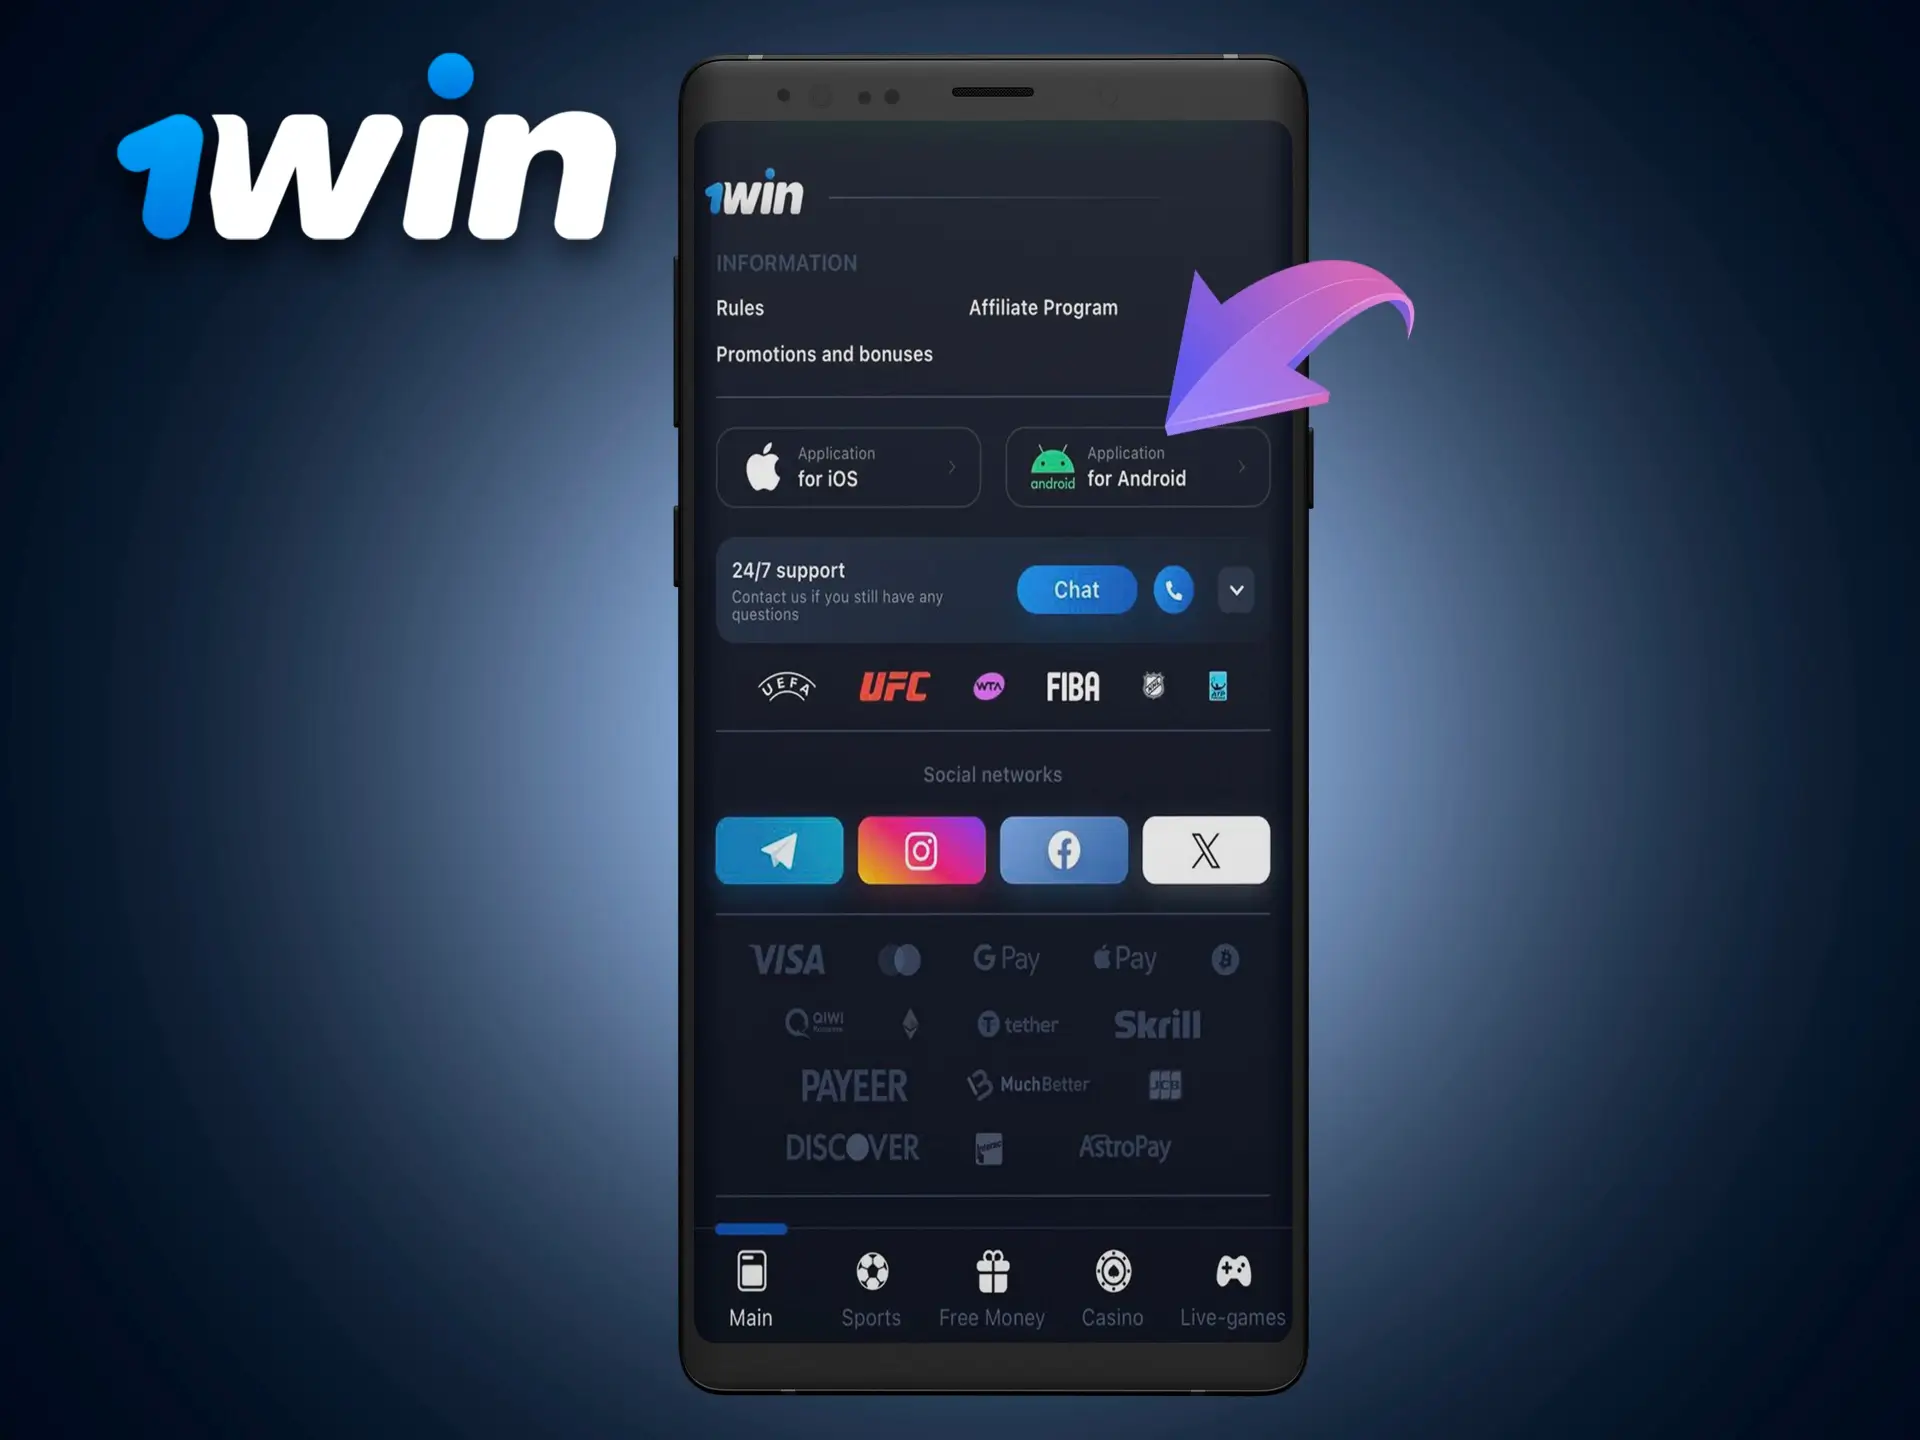 Start your download simply by selecting the android logo on the 1Win website.